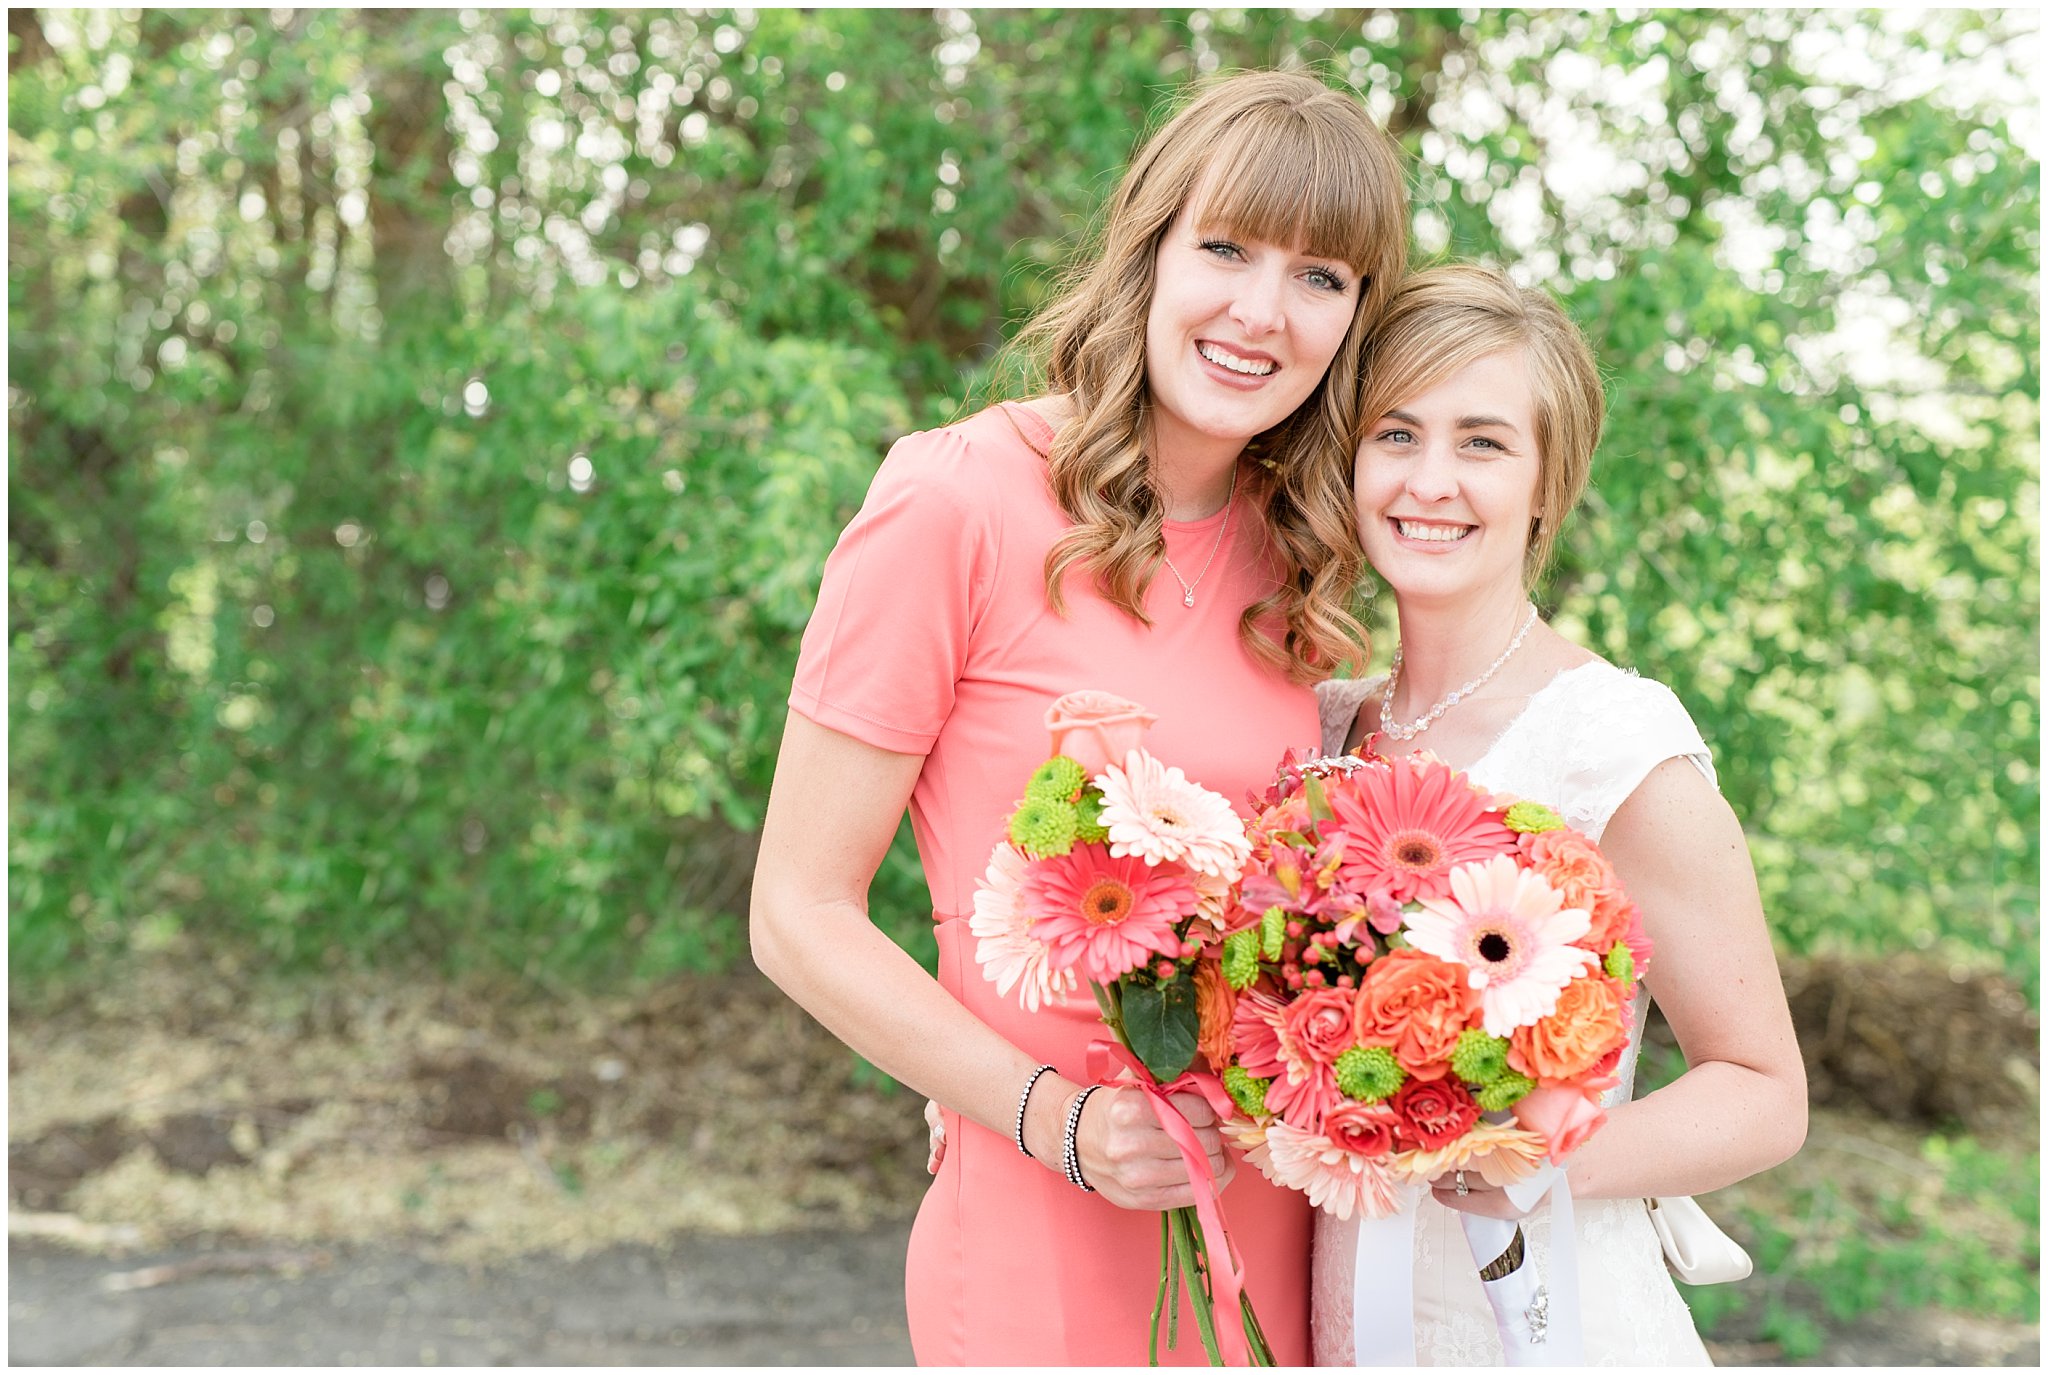 Salt Lake reception | Bridesmaid pictures | Coral and grey wedding